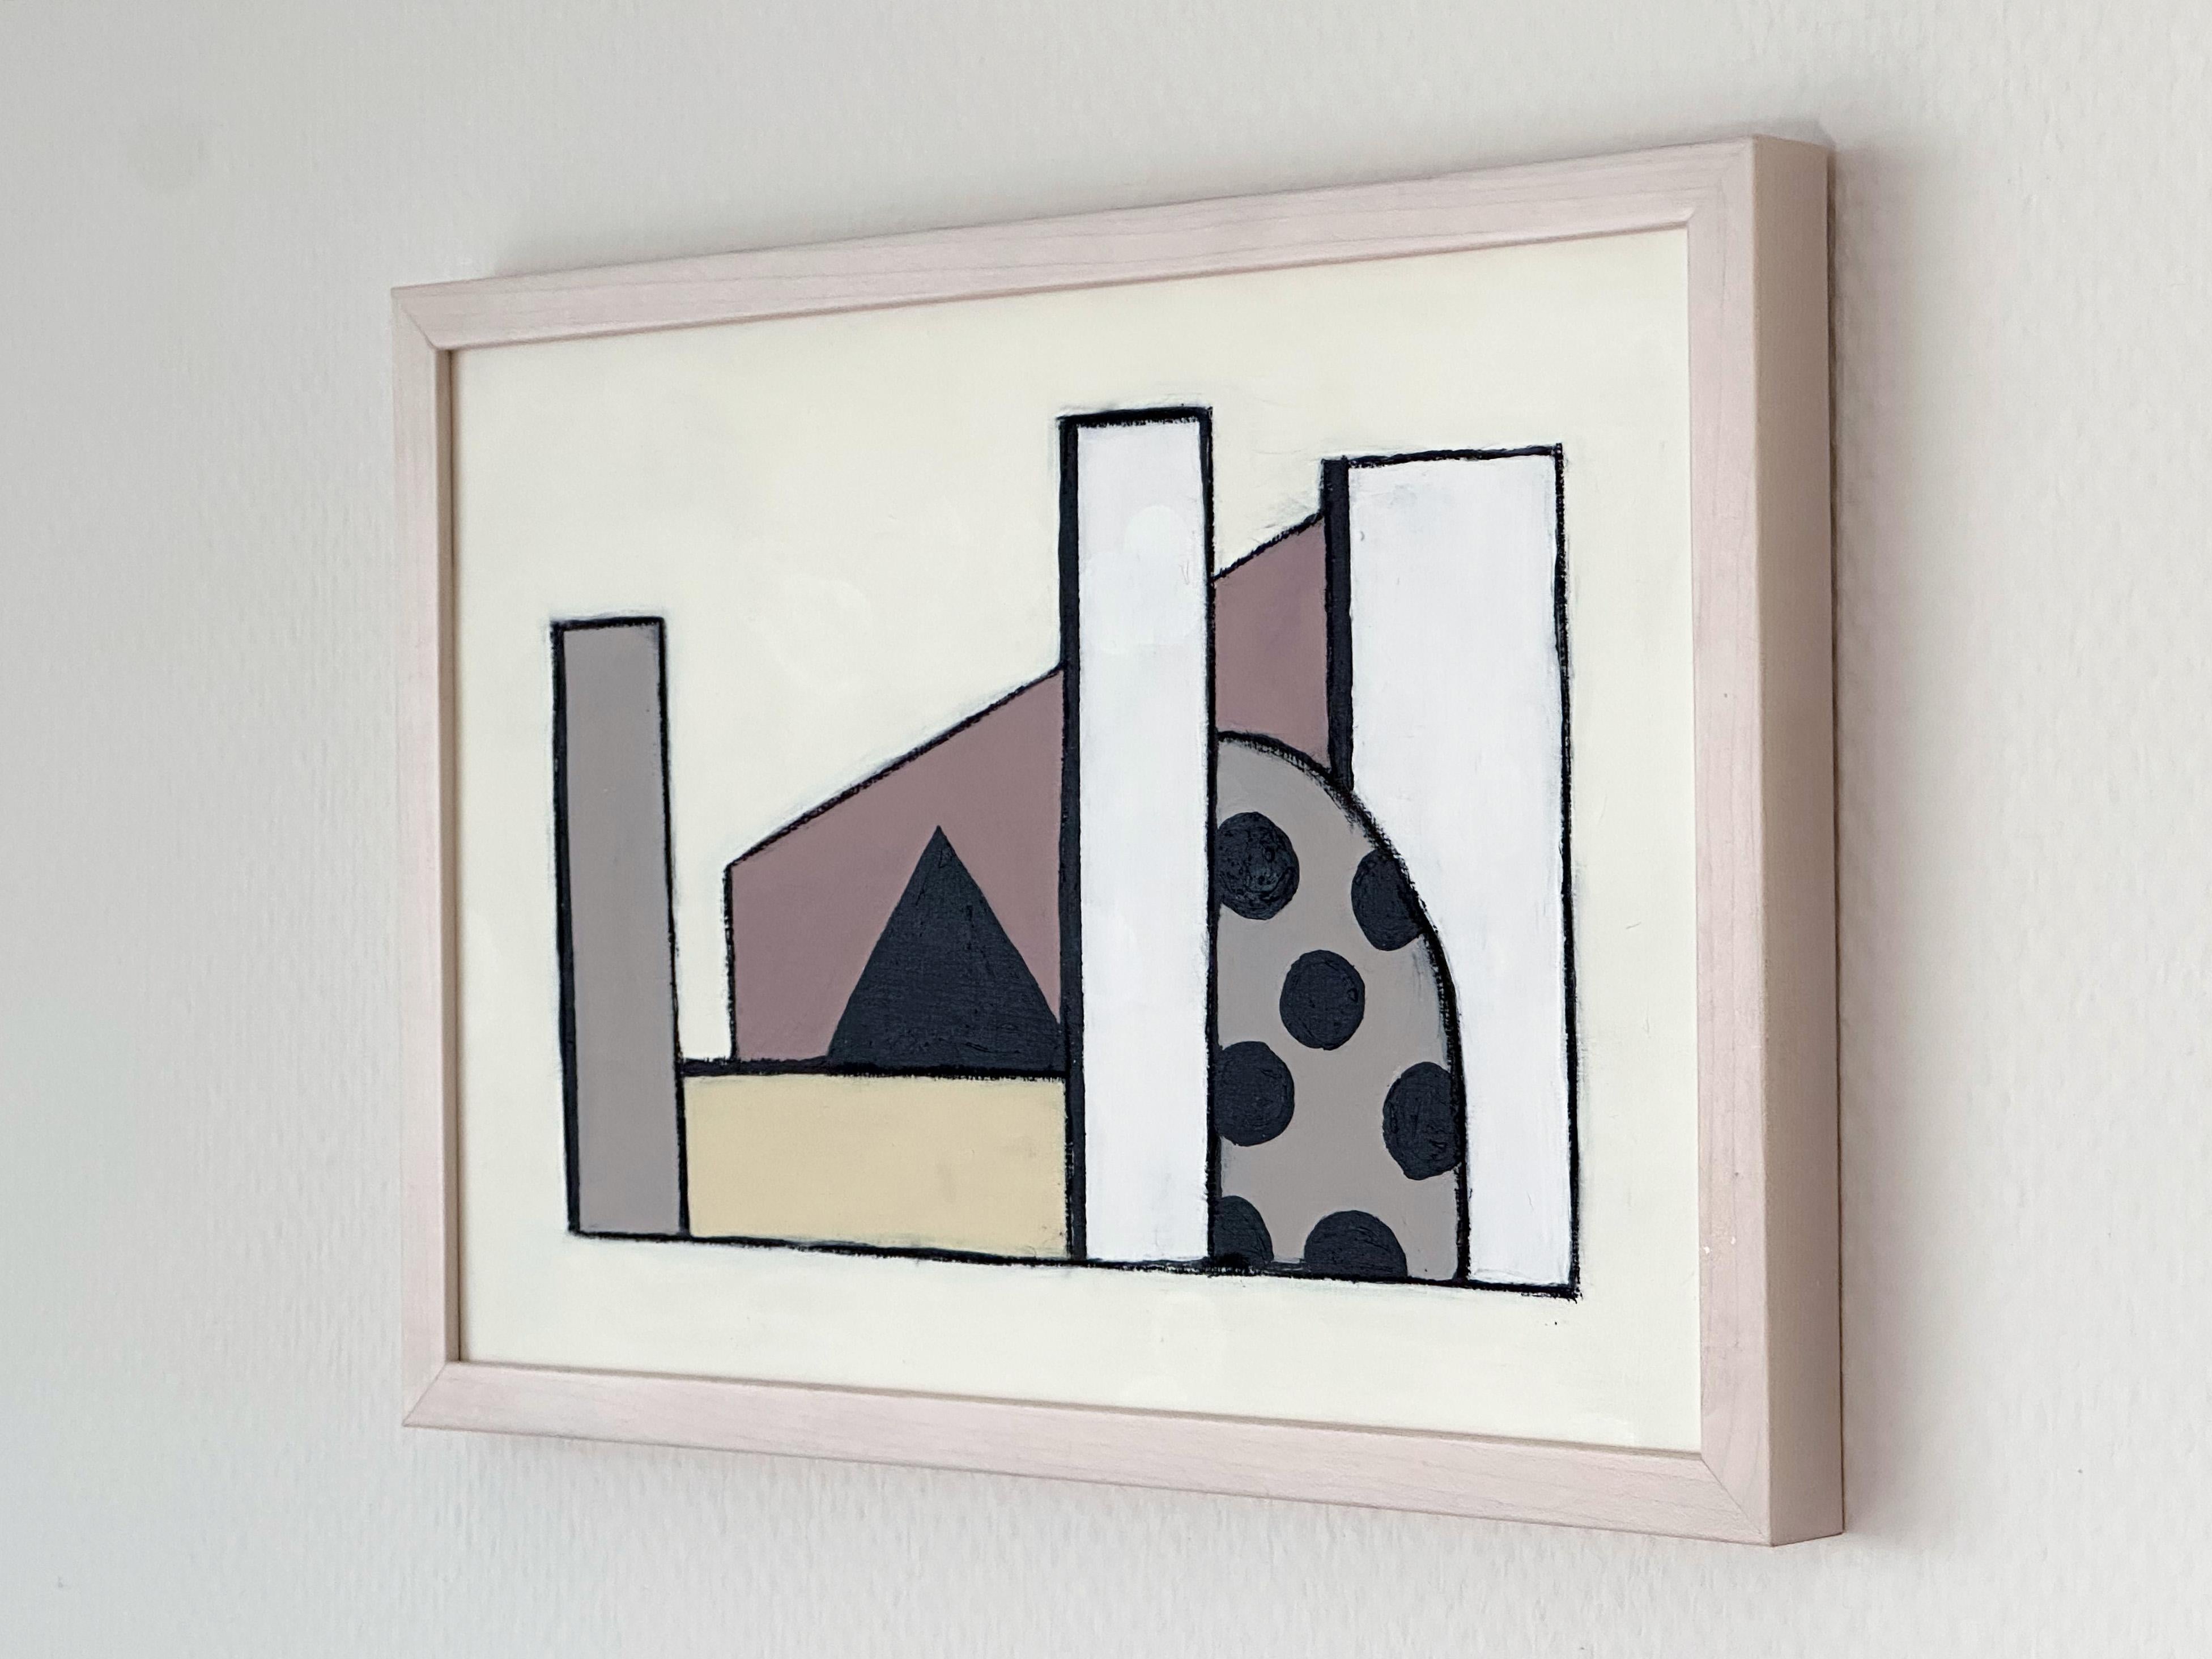 One in a series of three small works created in 2021 with acrylic paint and charcoal on 270g archival quality paper.
This abstract urban landscape painting was inspired by brutalist architecture and fever dreams of a slow moving polka dotted blob. A